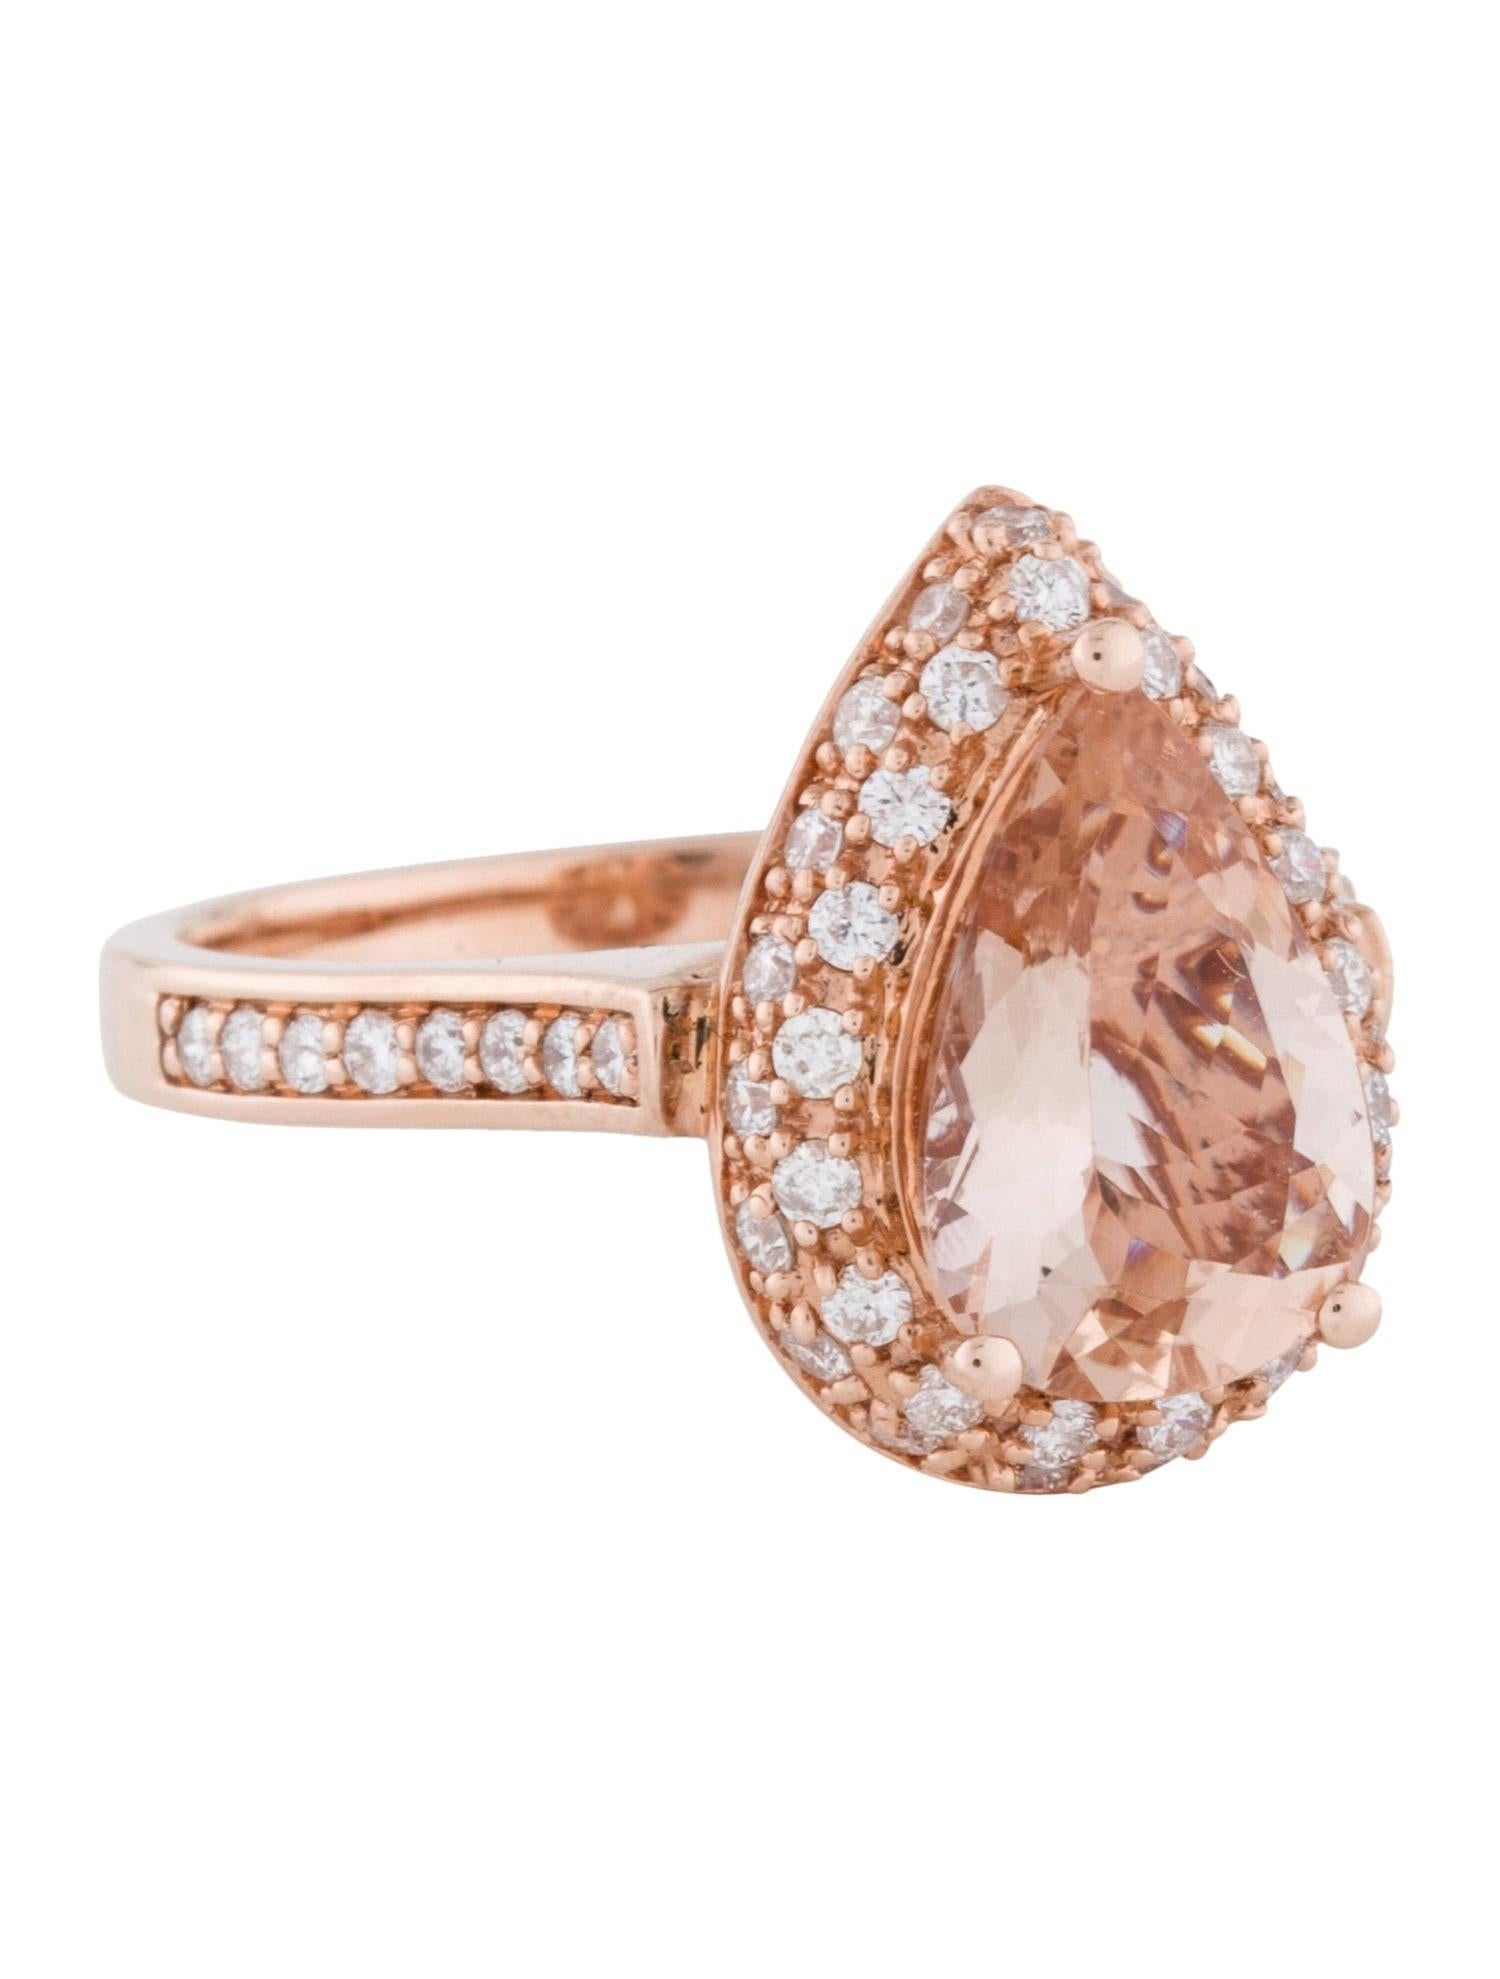 This flawless natural morganite and diamond ring is set in solid 14K rose gold is a true showstopper. This ring has a natural 2.38Ct pear cut morganite stone with excellent peachy pink color and is surrounded by a halo of round cut white diamonds.